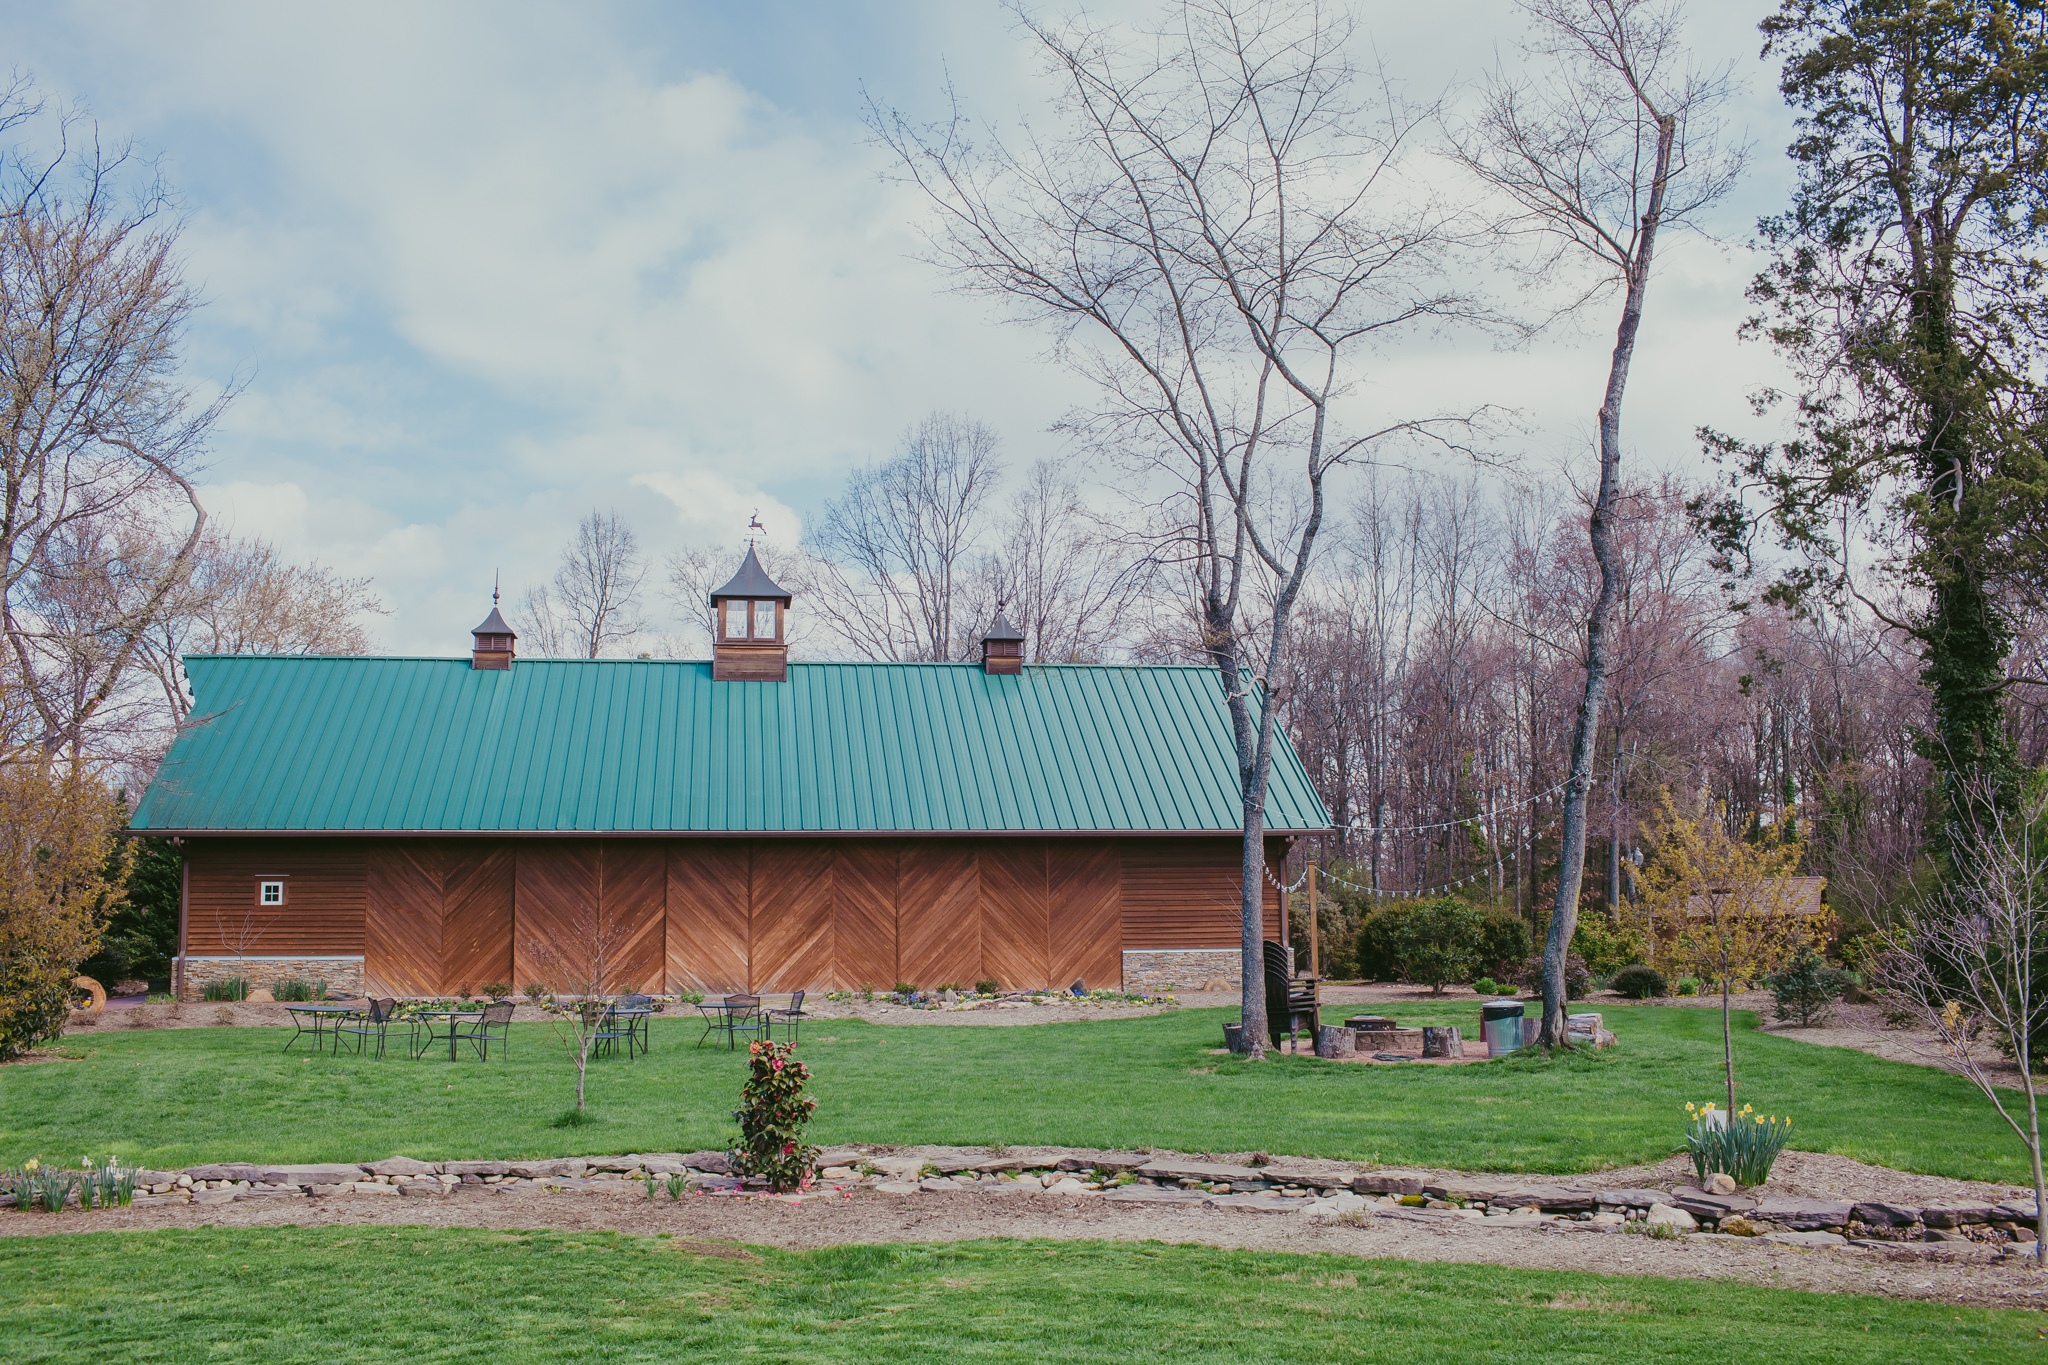 A wide view of the beautiful reception barn at Alexander Homestead